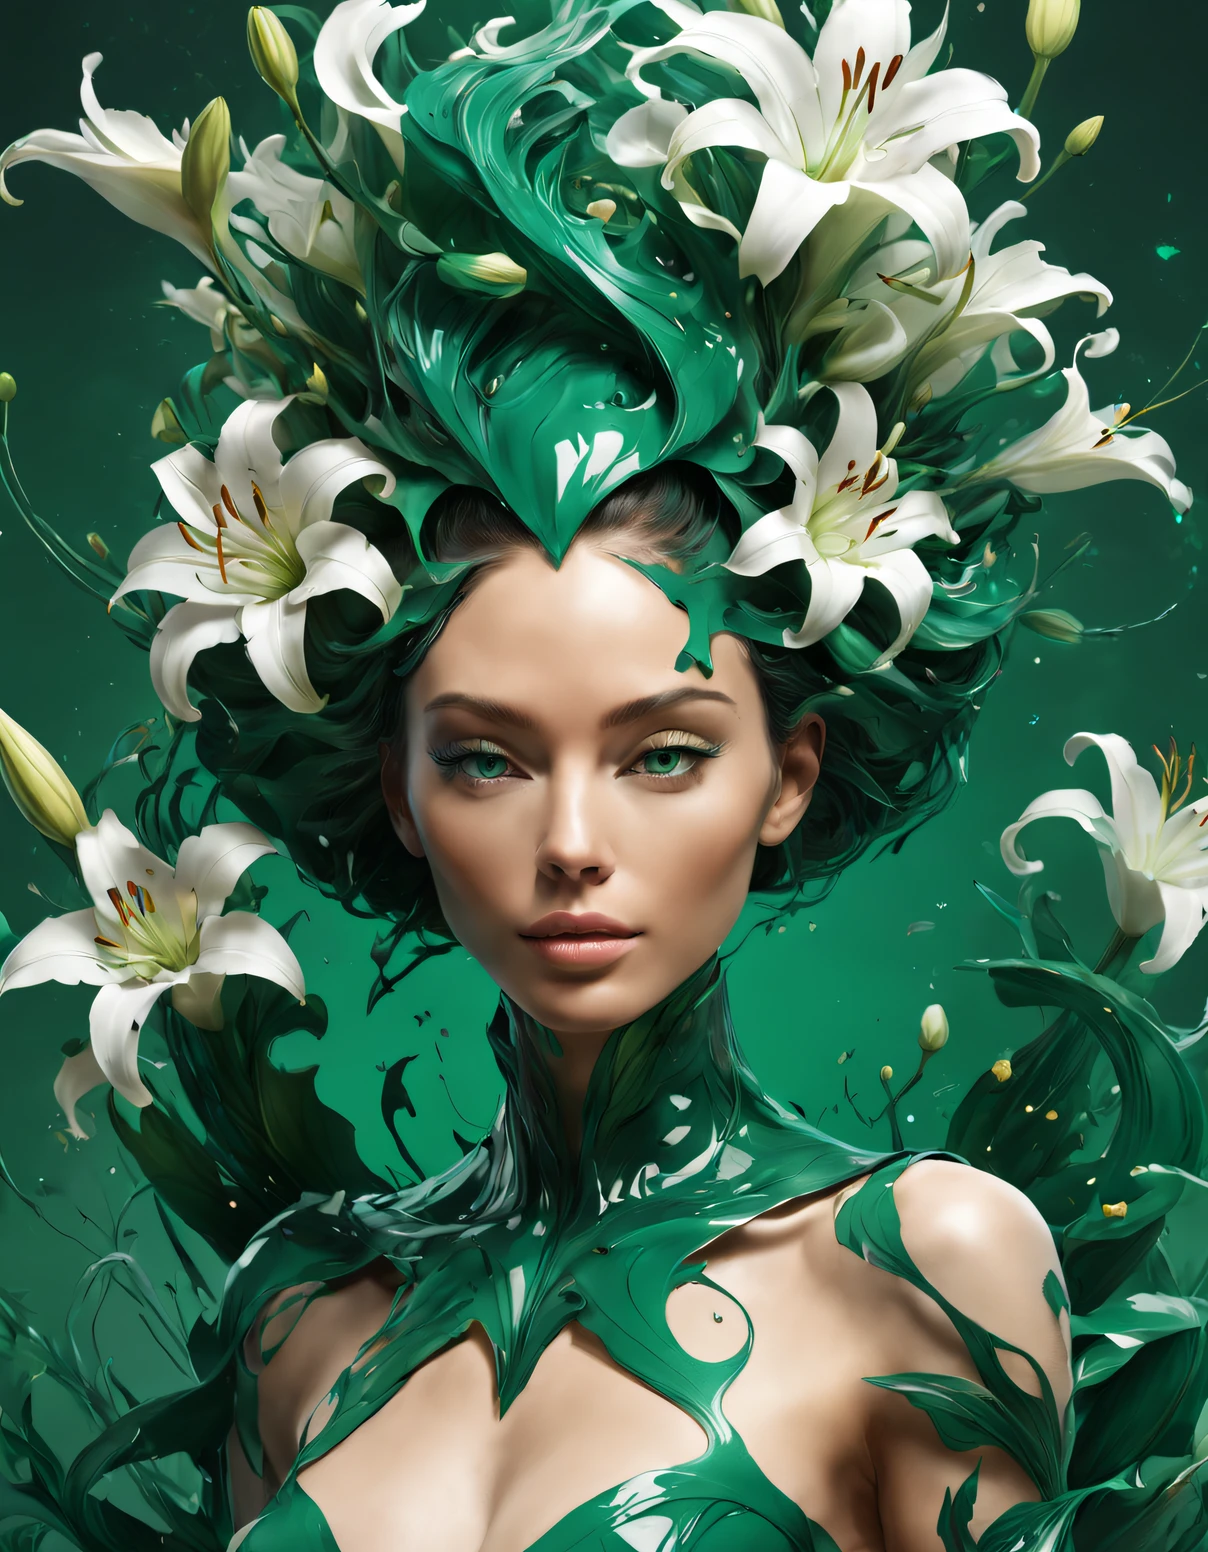 double contact，（Girl with lilies all over her body and head），emerald and white，,Rendered by Octane，unreal-engine，Rococo paper cutting，Fantasyart，Surreal